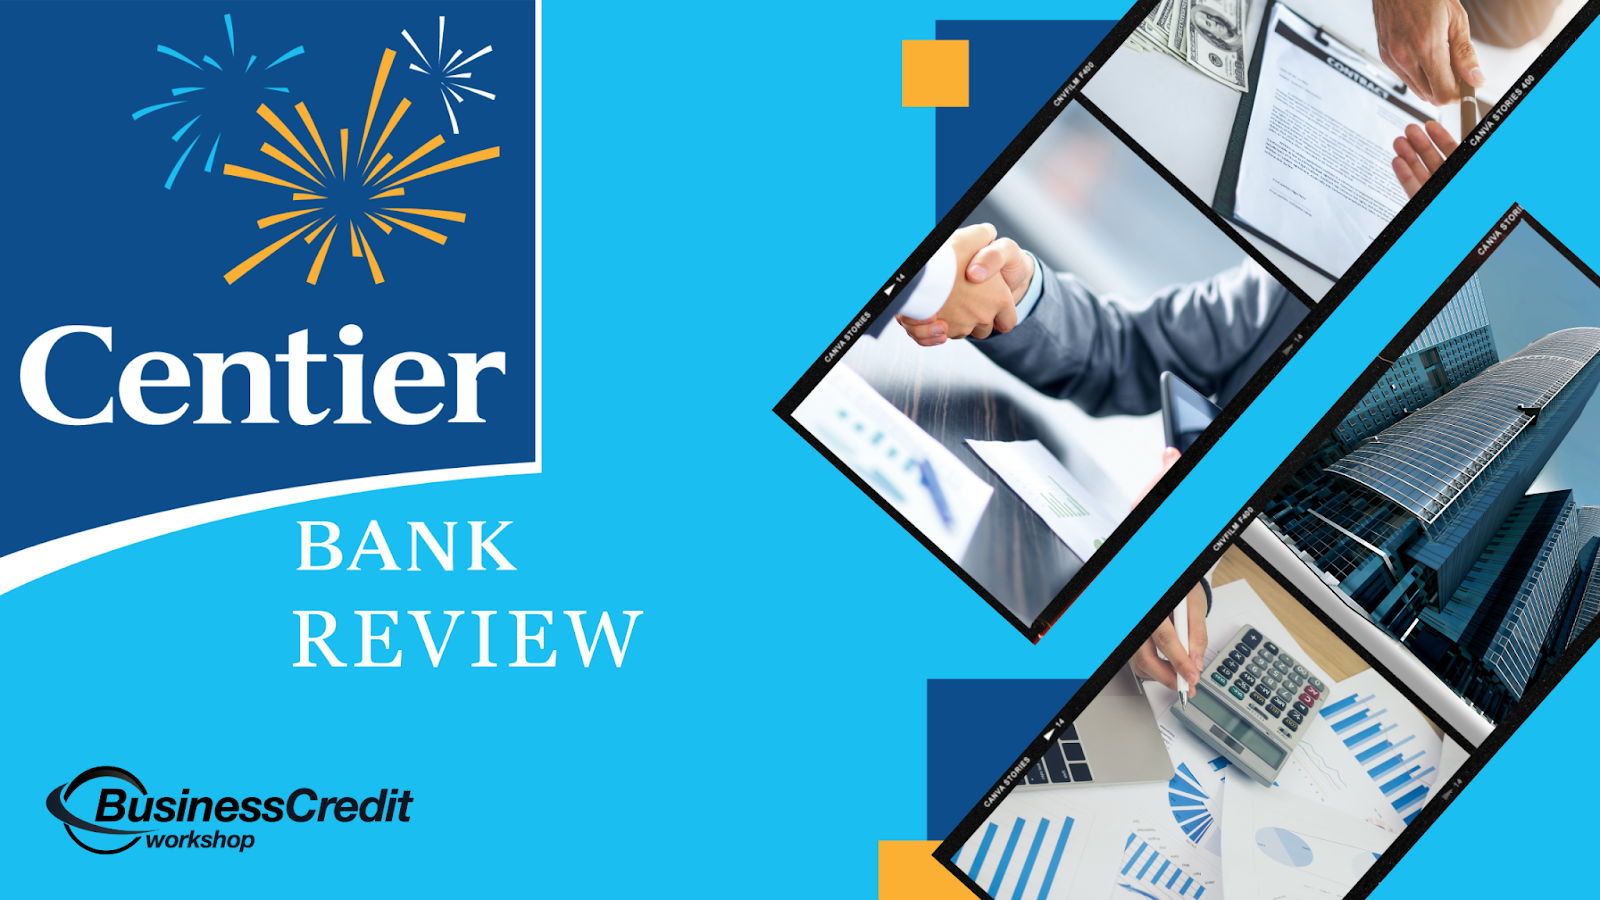 Centier Bank Review